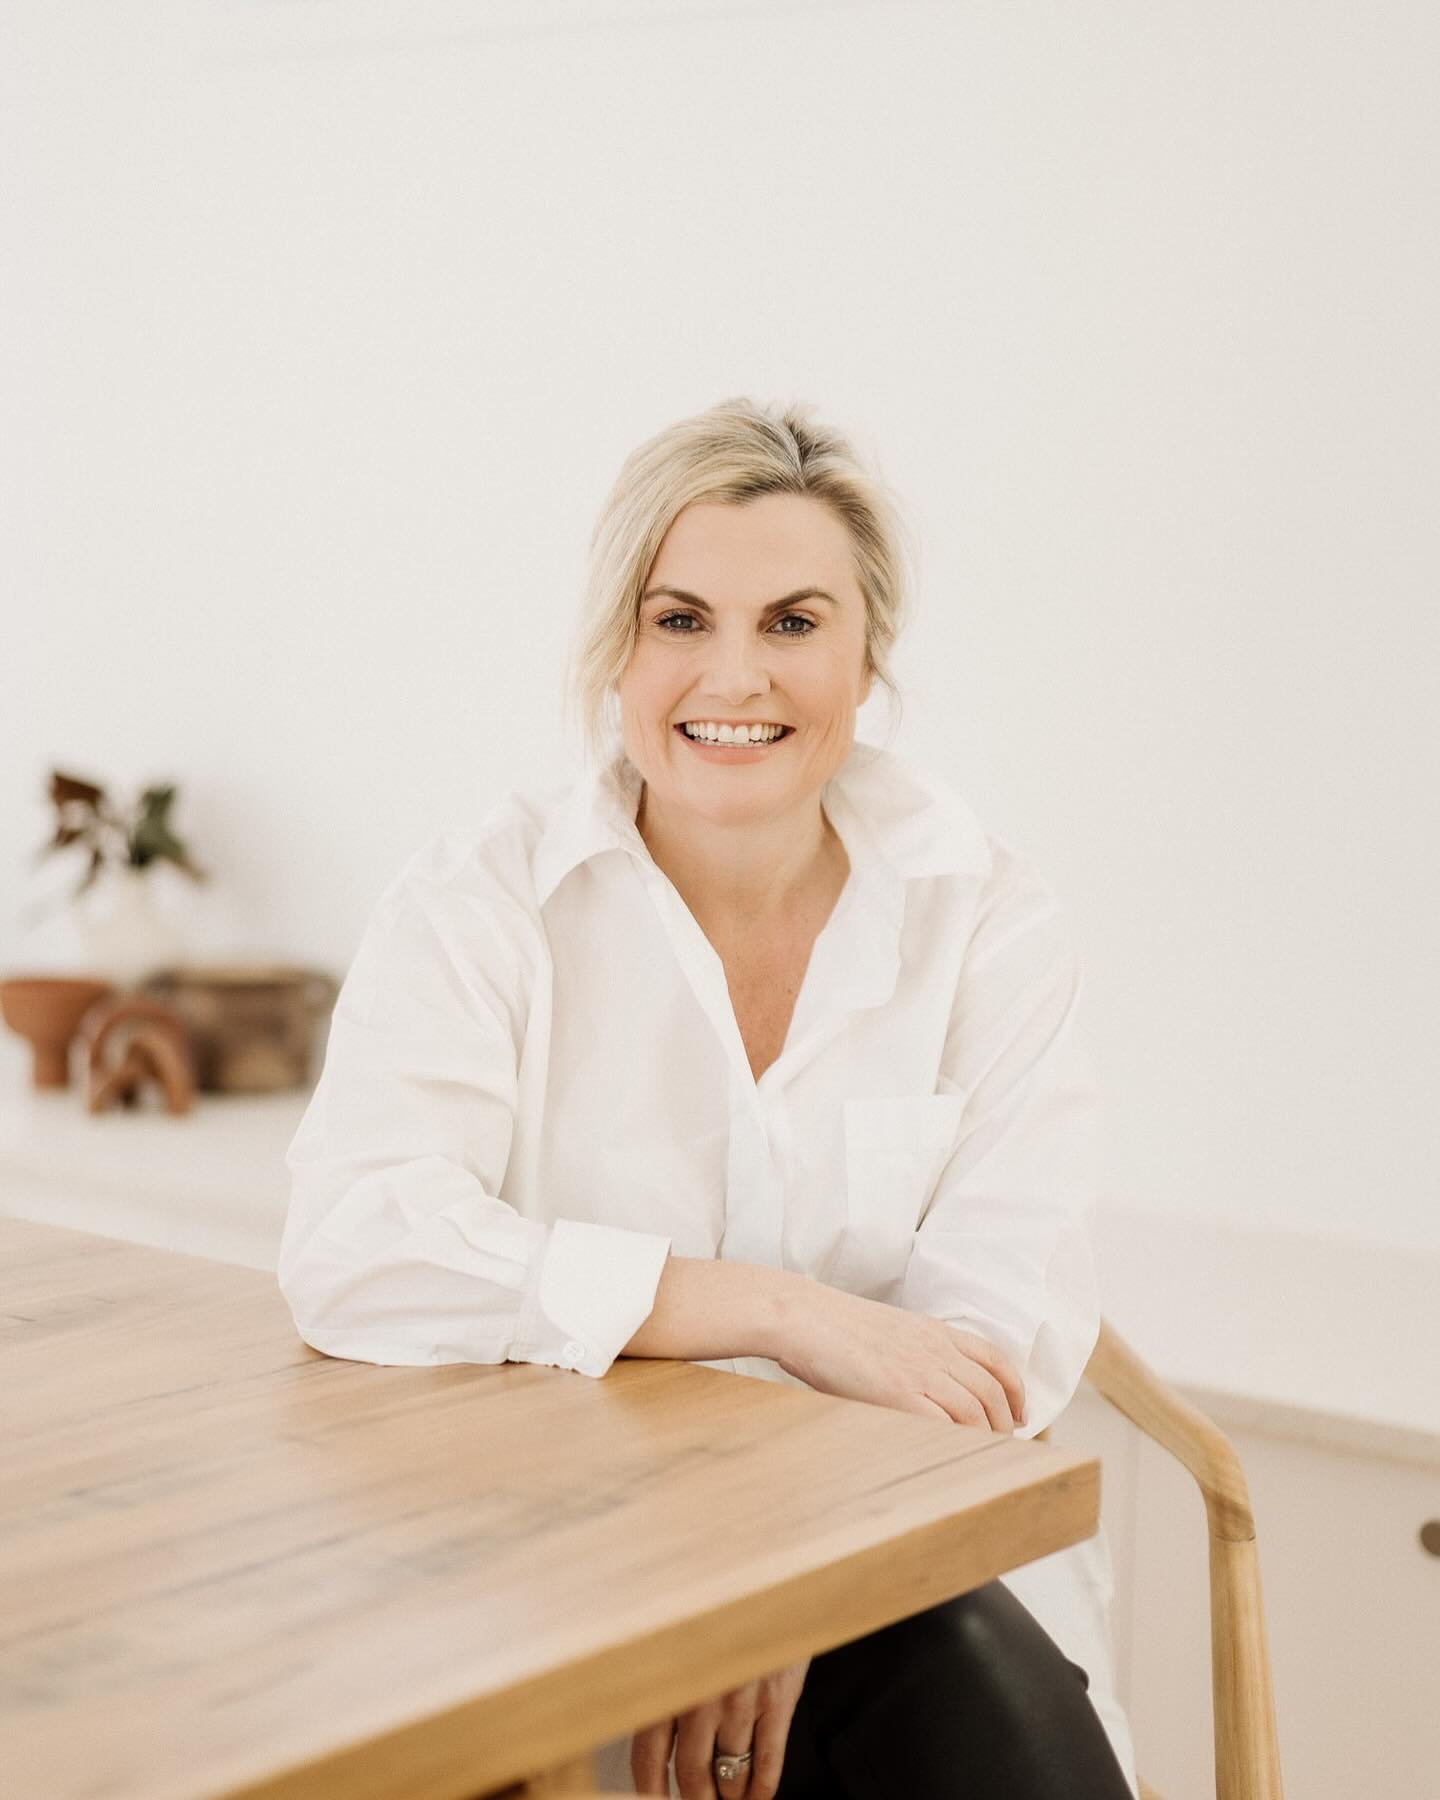 A beautiful image of talented Interior Designer @sarahfootedesign at one of my mini branding shoots.

I believe showing warmth and personality in your profile image on your website is so so important, especially for creatives. Think carefully about y